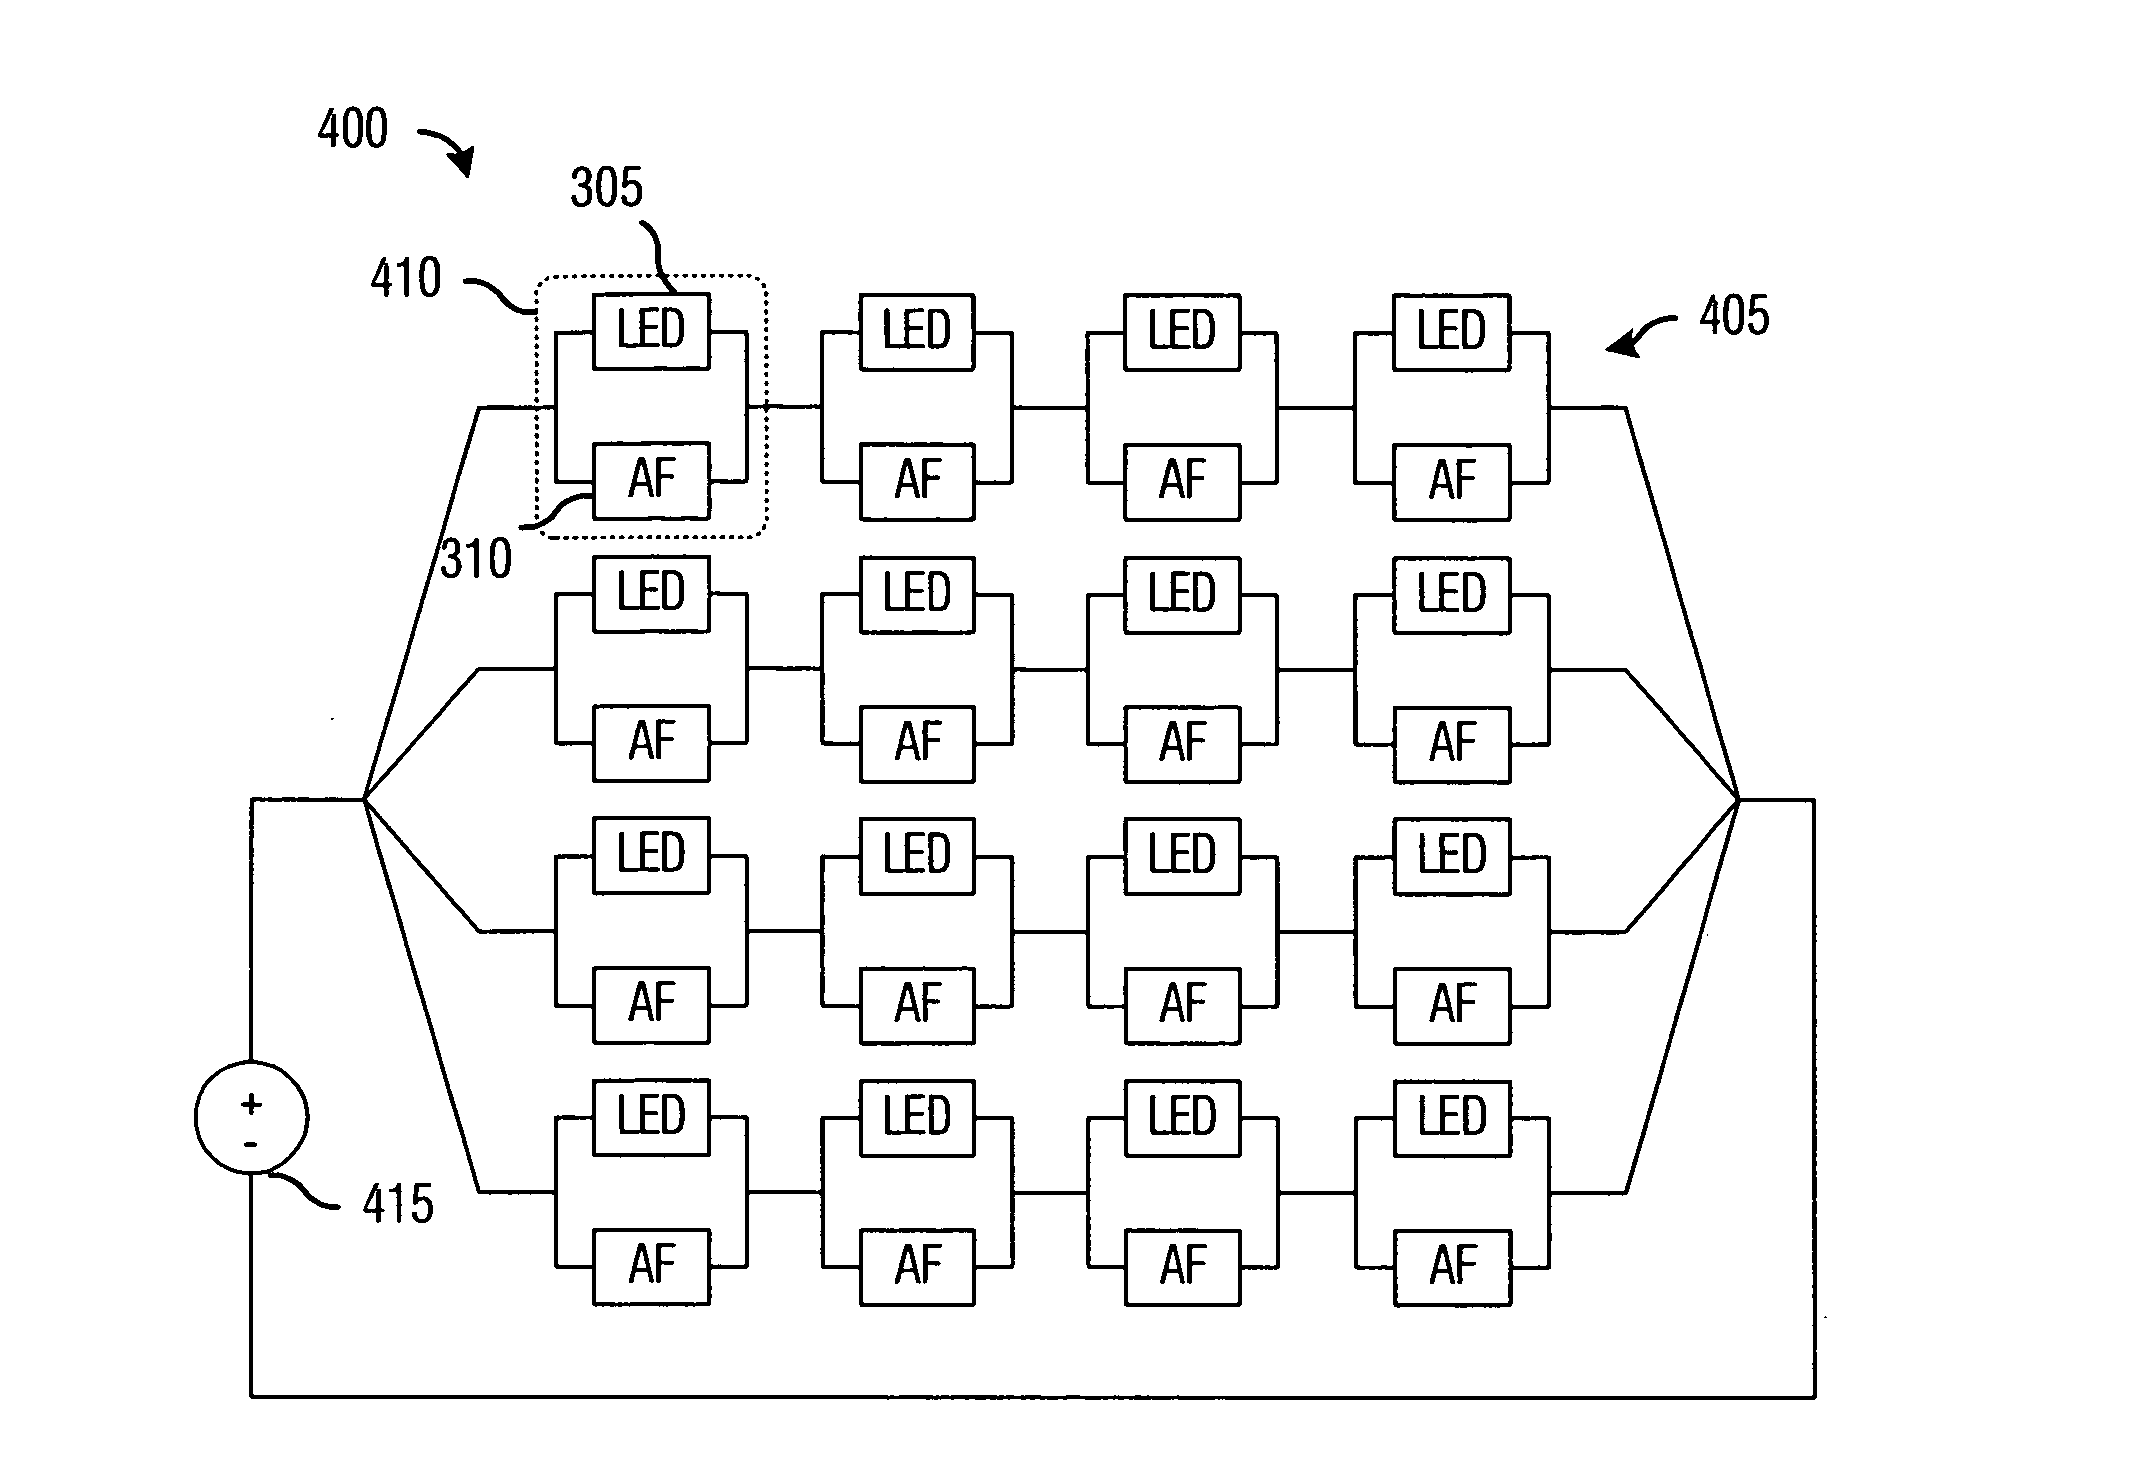 System for improving LED illumination reliability in projection display systems